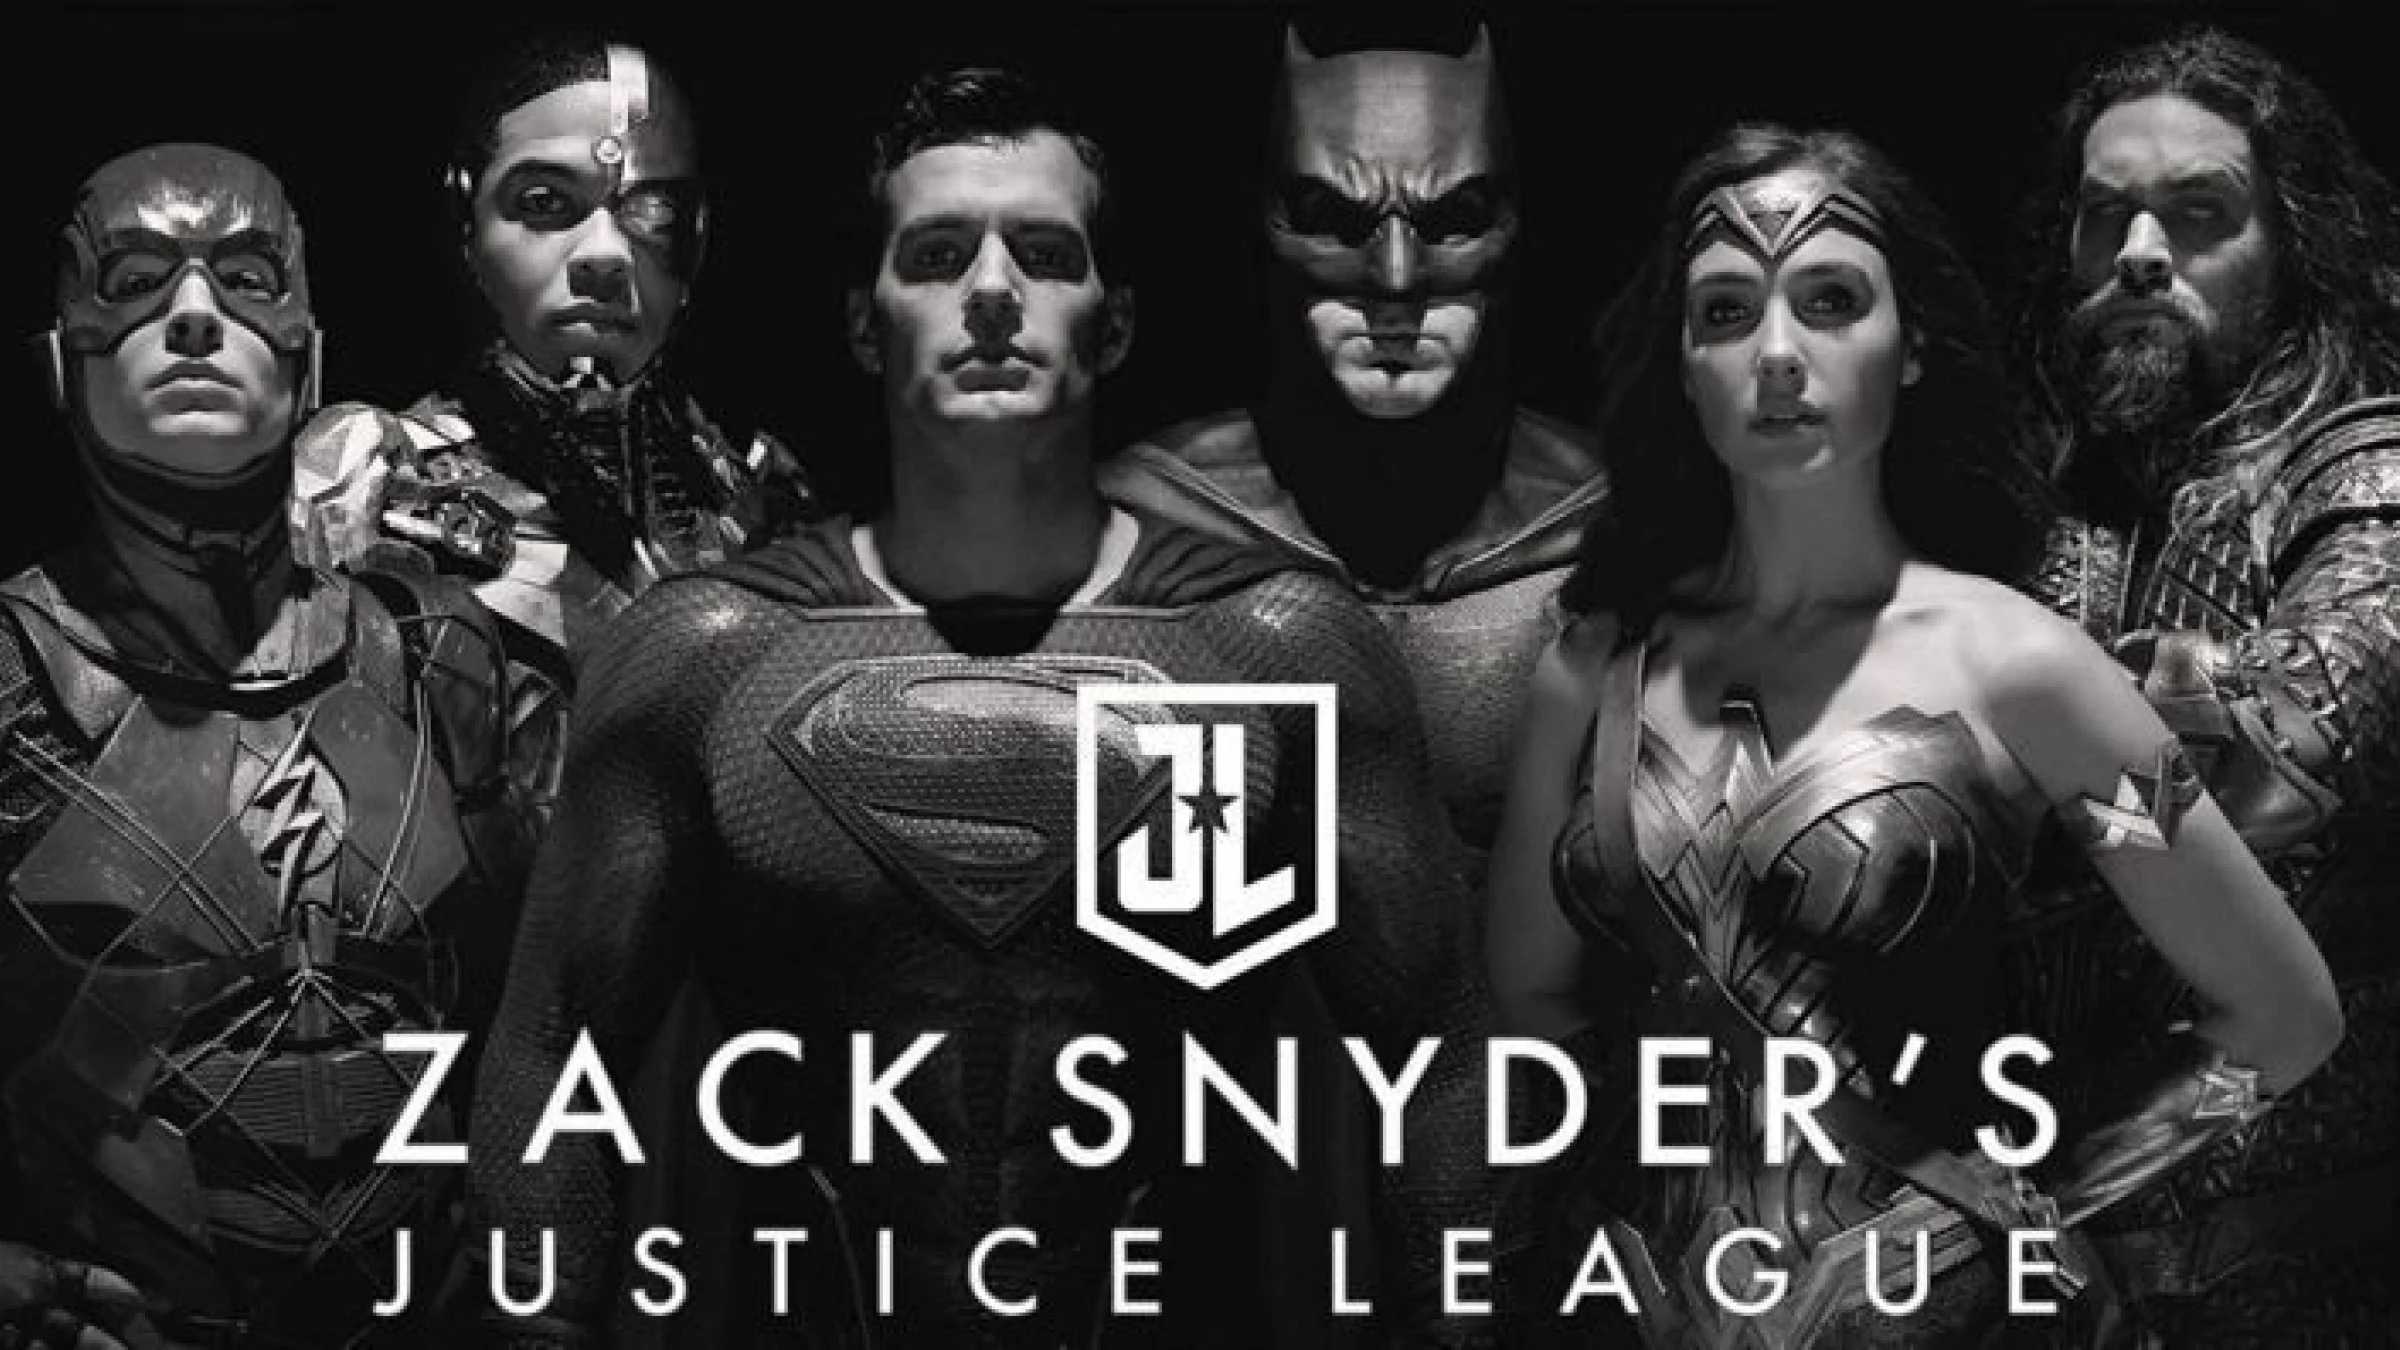 Justice League #ReleaseTheSnyderCut campaign was reportedly fuelled by bots and director Zack Snyder may have been involved